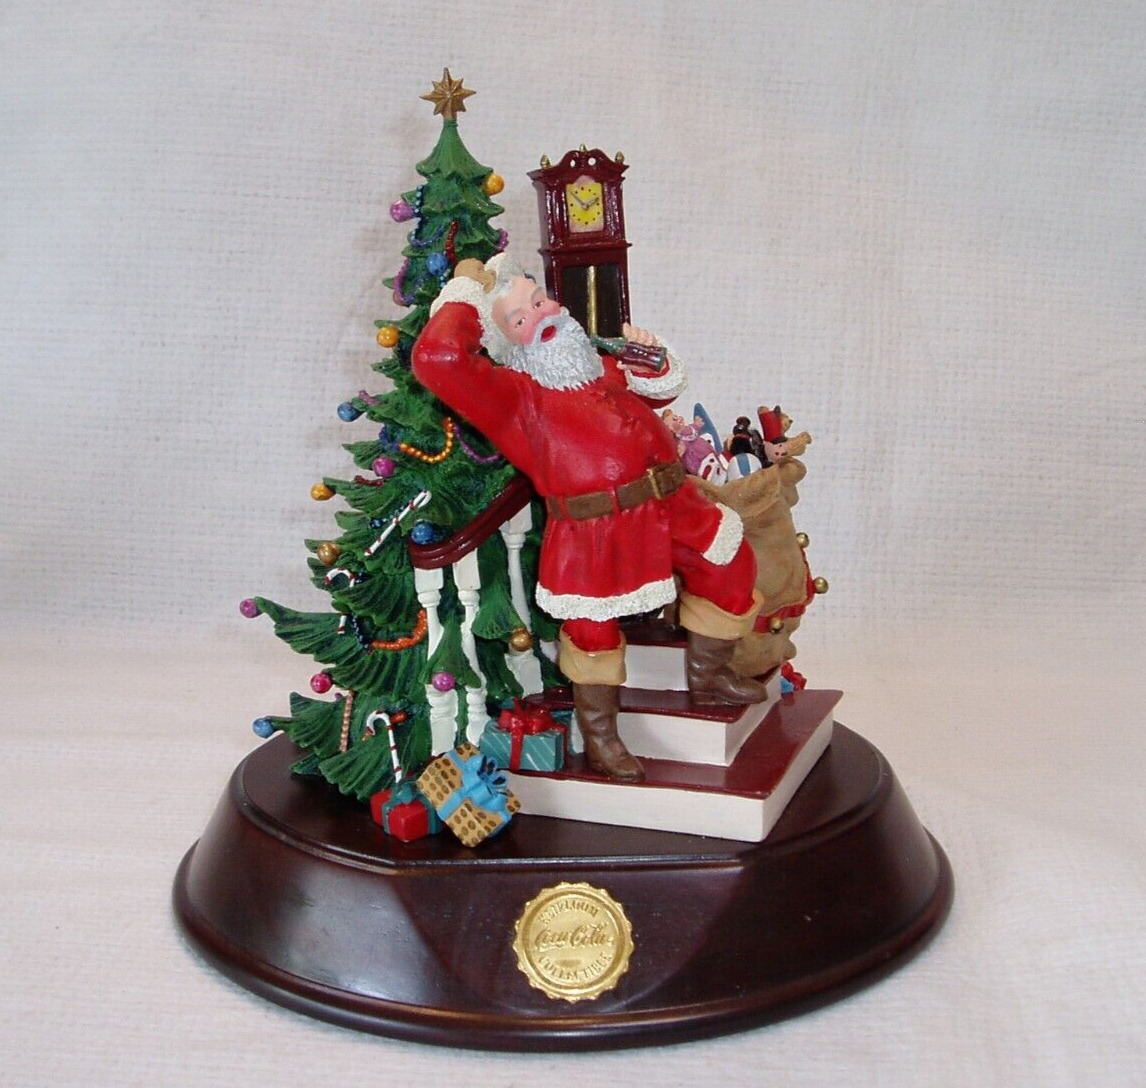 The Coca-Cola Santa Heirloom Collection Limited Edition Musical Figurine #H8436